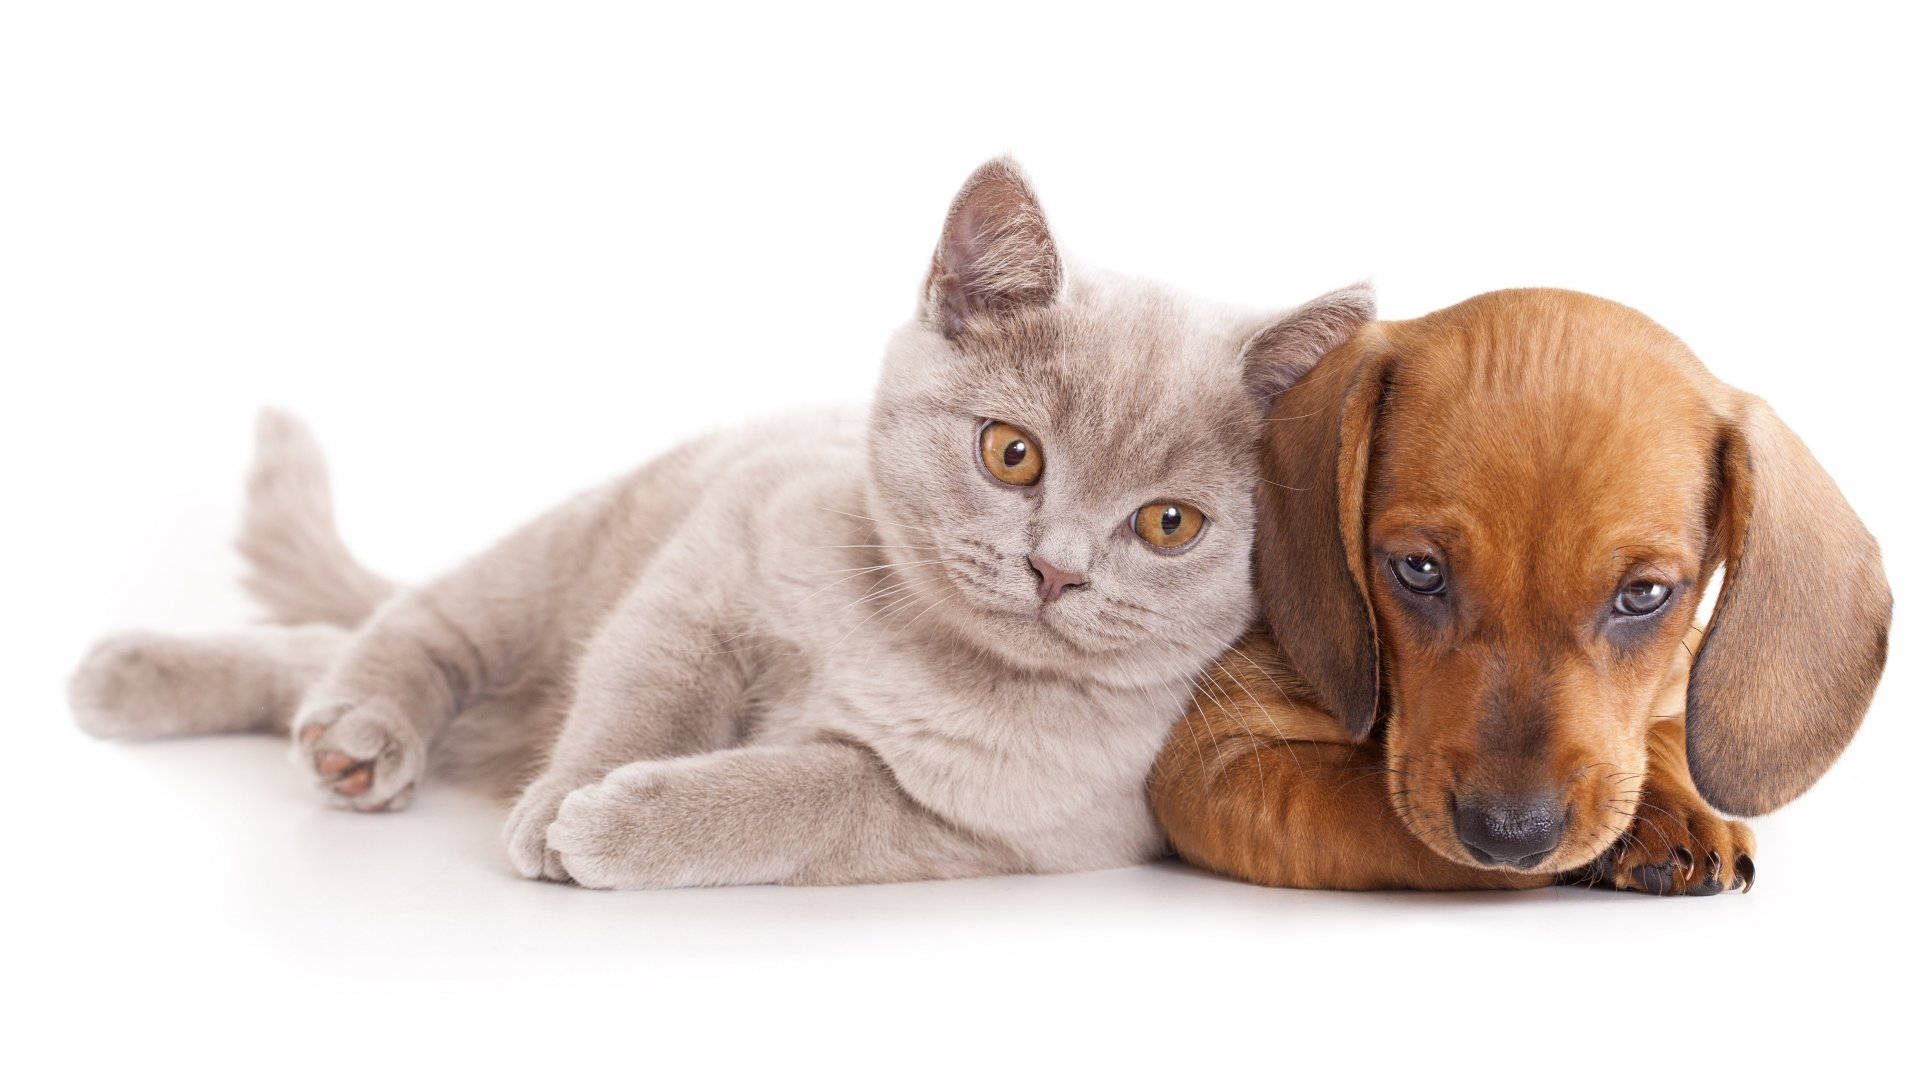 100+] Cat And Dog Wallpapers 